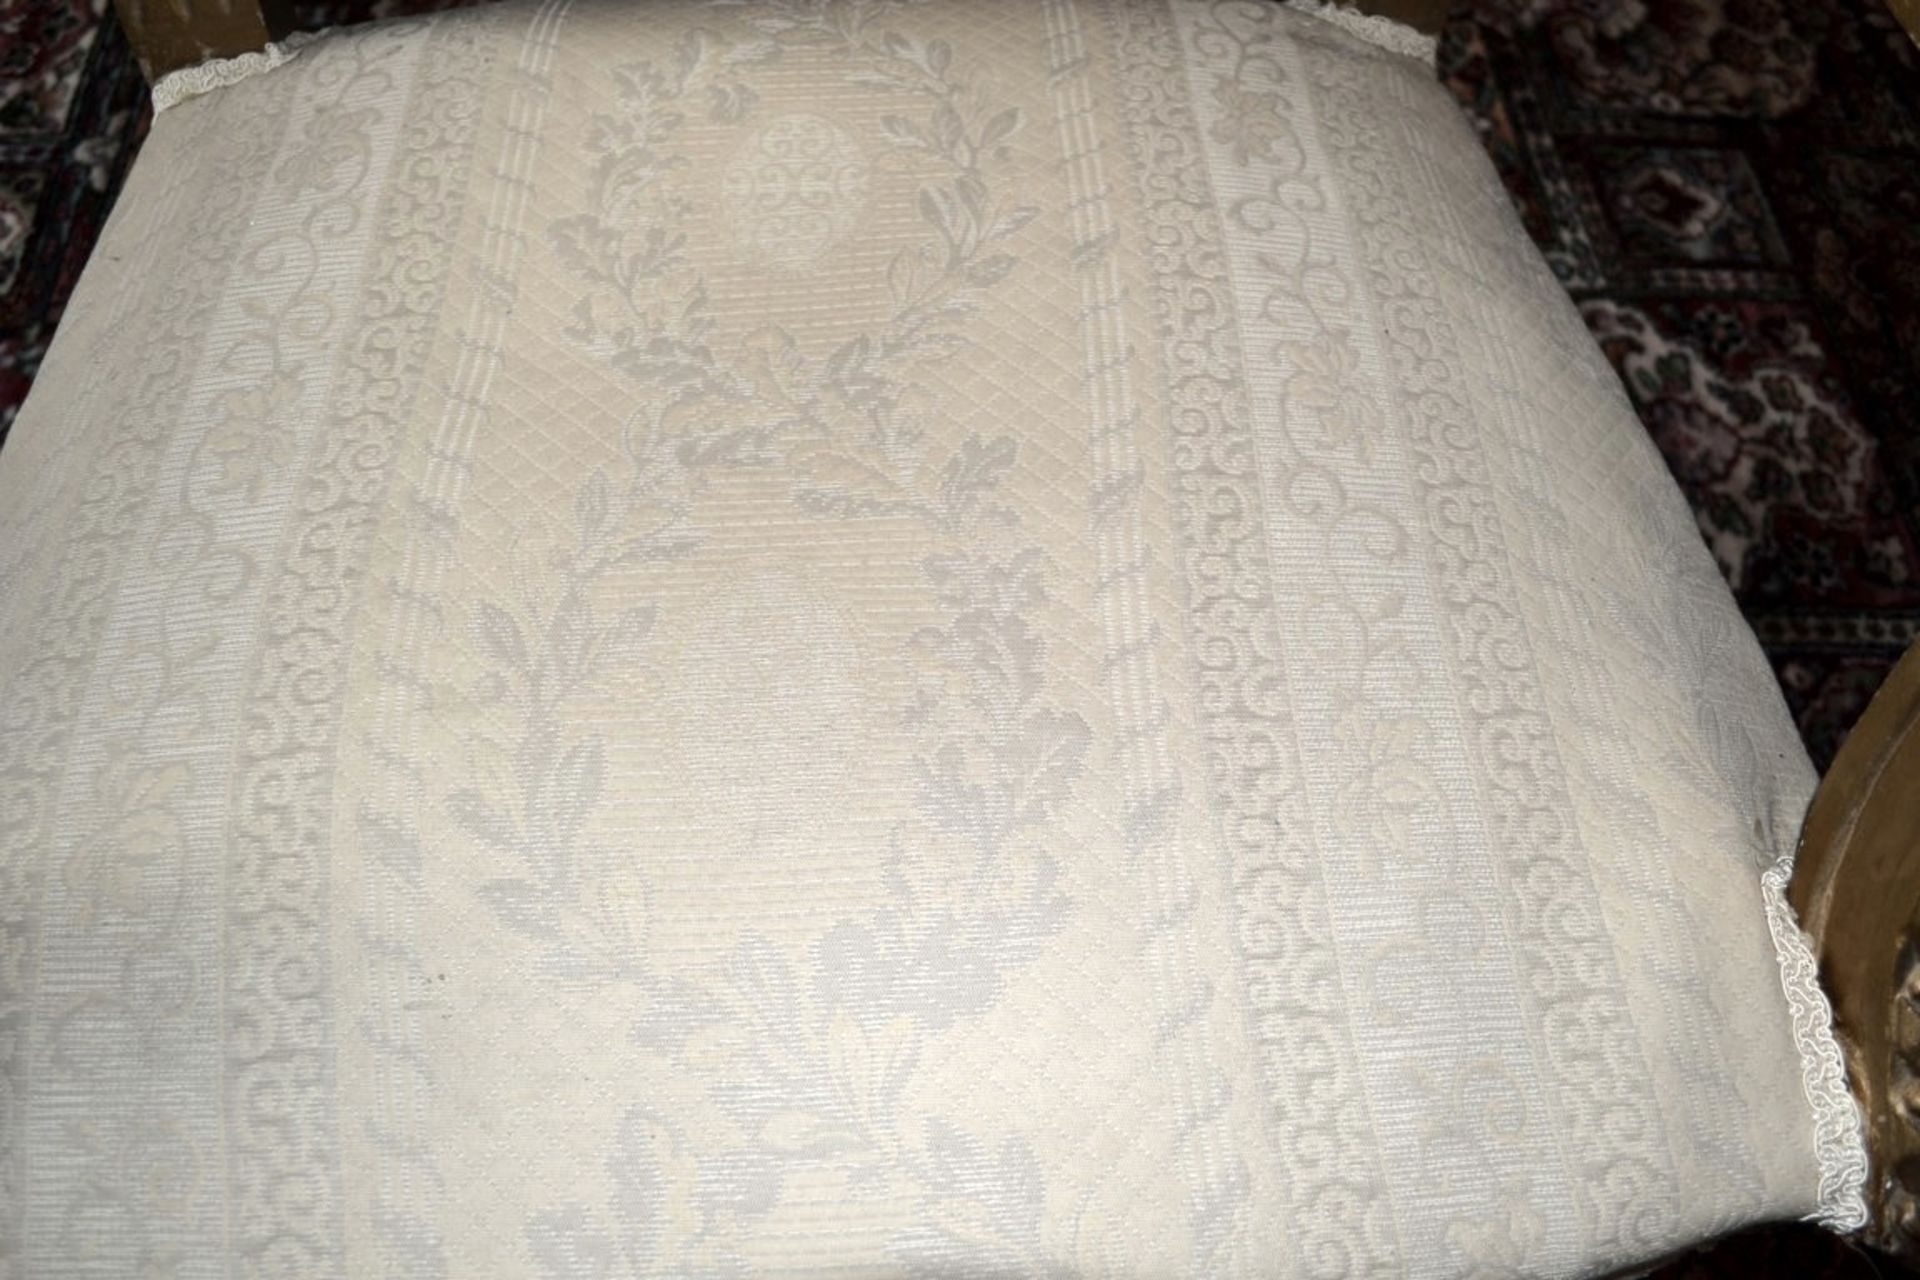 1 x Period Gold Gilt Armchair - Upholstered In A Rich Cream Fabric - From A Grade II Listed Hall - Image 5 of 9